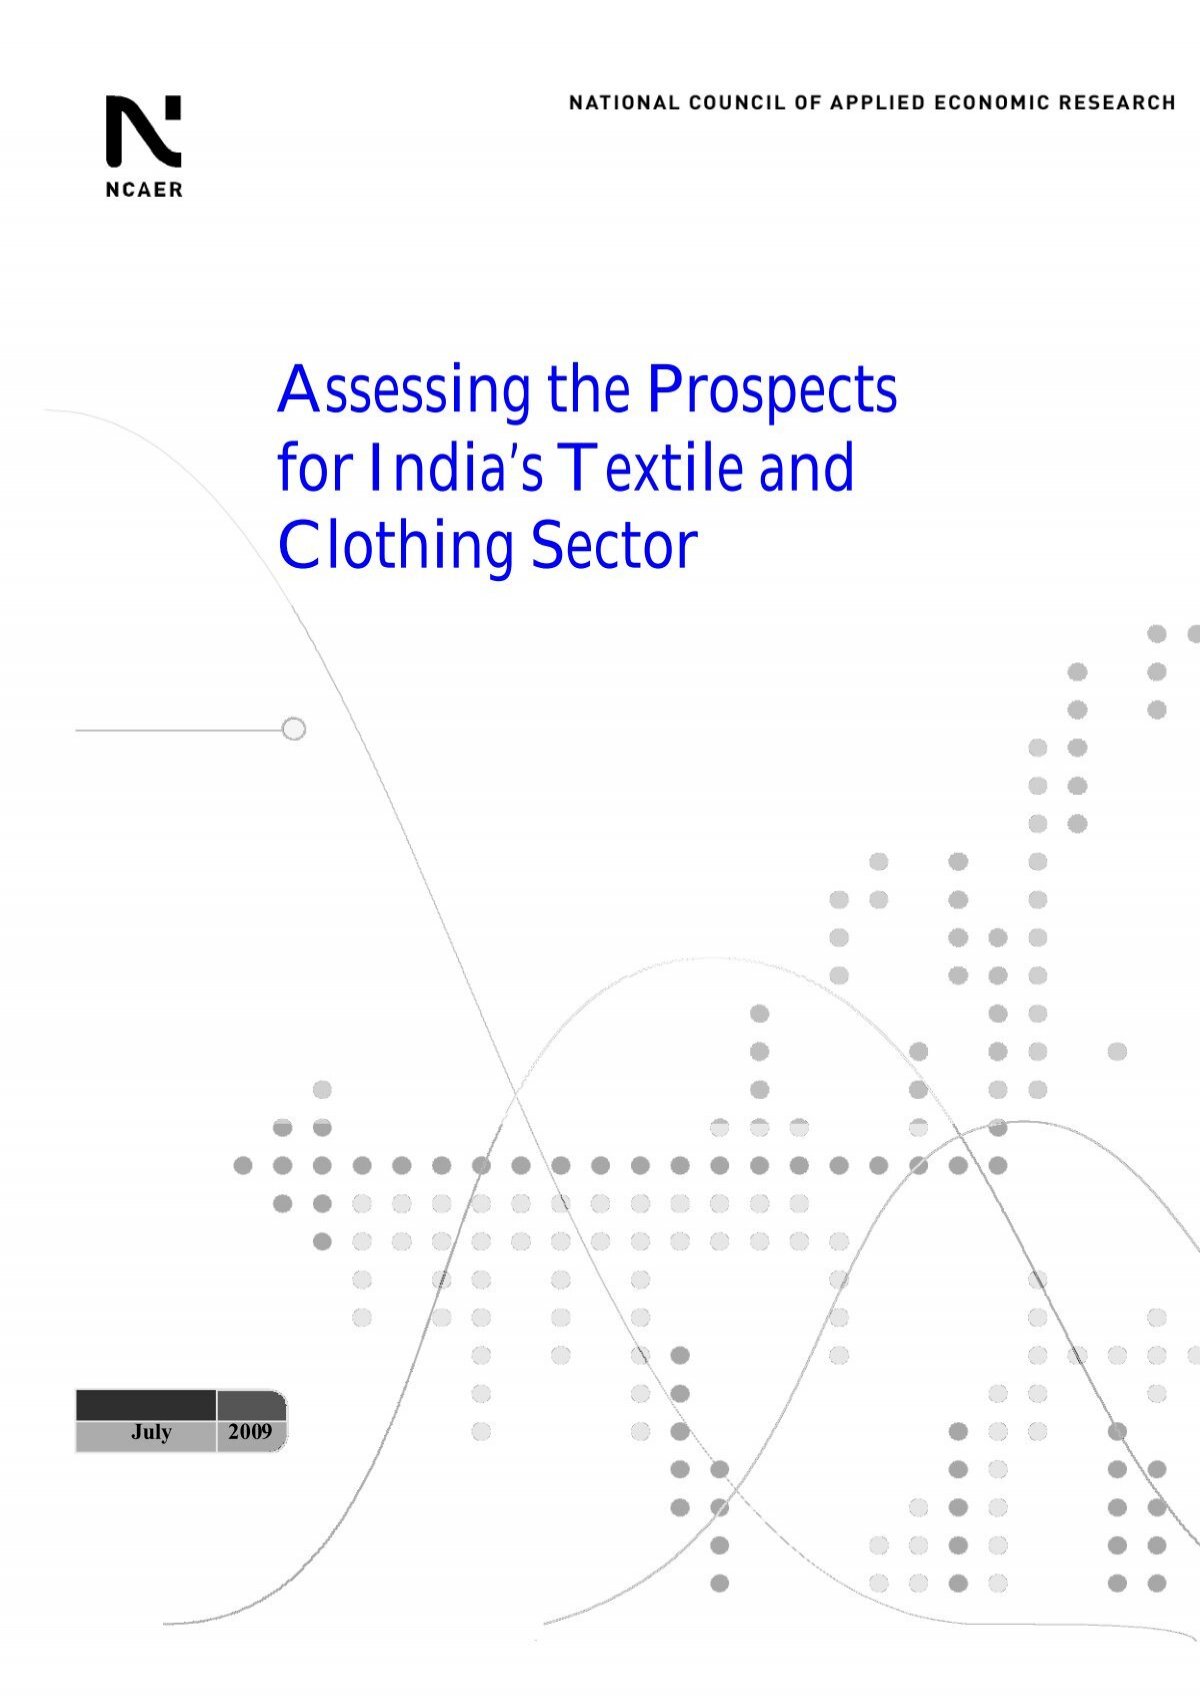 Assessing the Prospects for India's Textile and Clothing Sector